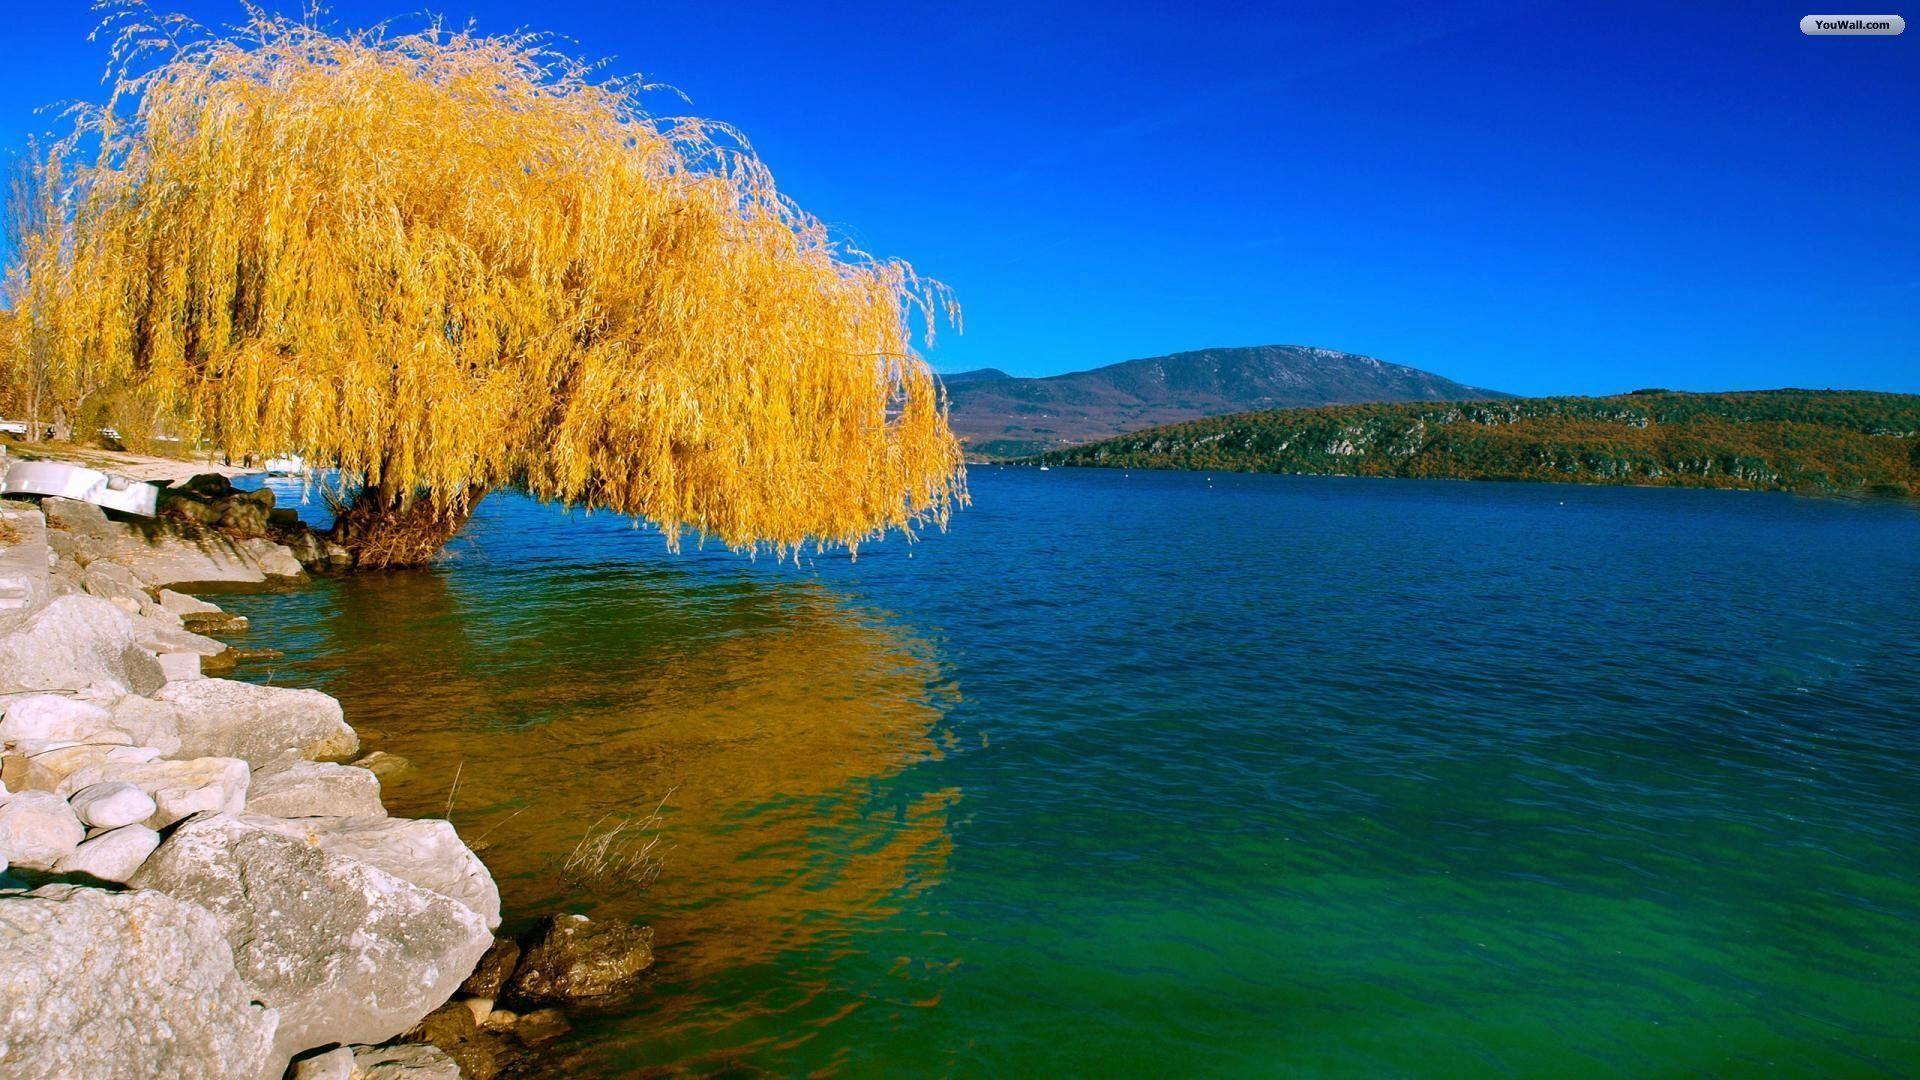 image For > Weeping Willow Tree Wallpaper HD